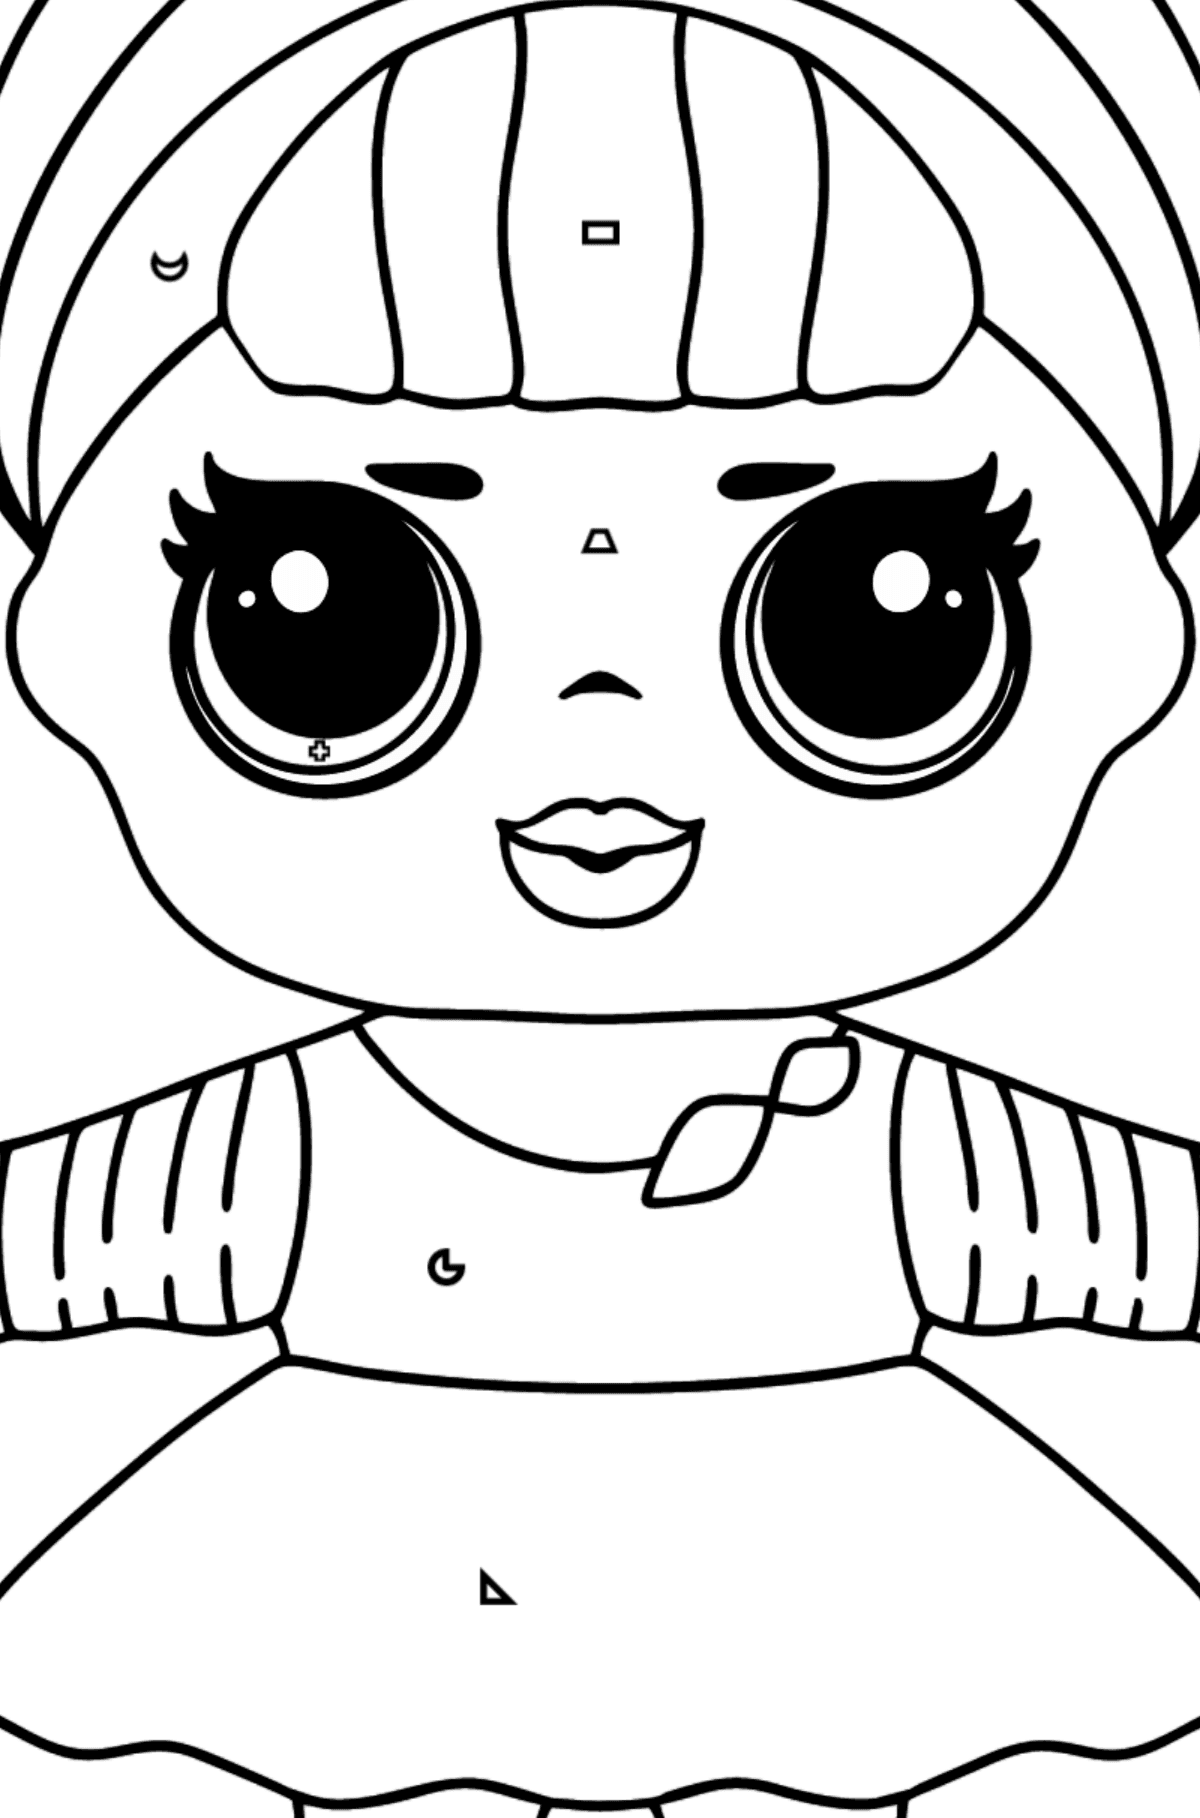 LOL Surprise Doll Sis Swing Coloring page - Coloring by Geometric Shapes for Kids